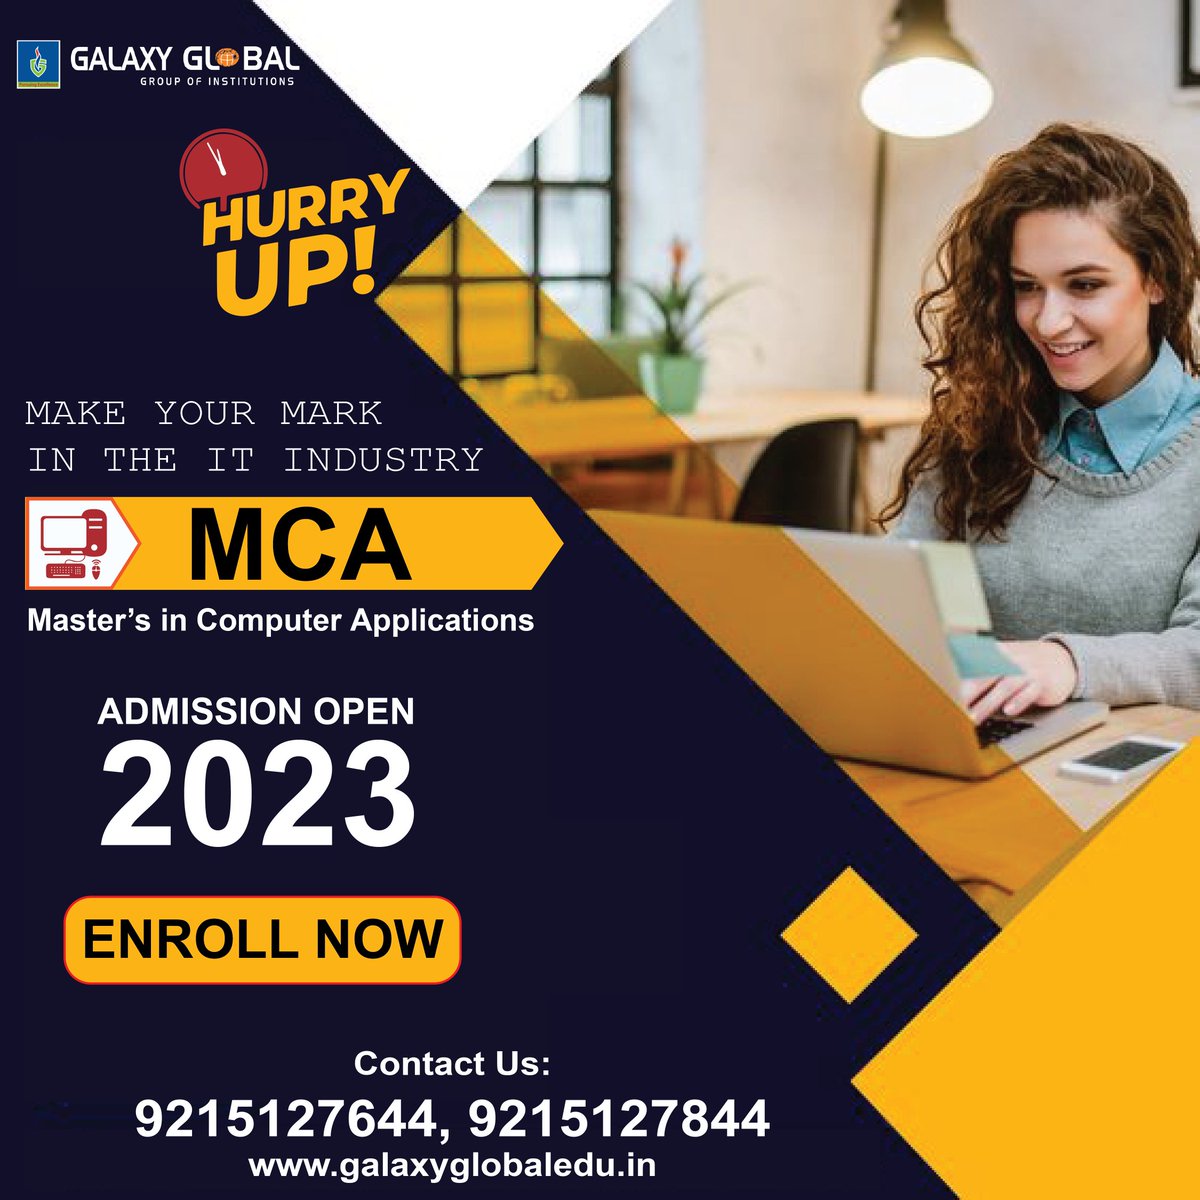 Master of Computer Applications (MCA) is a well-known postgraduate degree in computer science that offers academic education and hands-on training for aspiring IT professionals.

Enroll Now @ Galaxy Global Group of Institutions, Ambala

#gggi #mca #admissionopen2023_2024